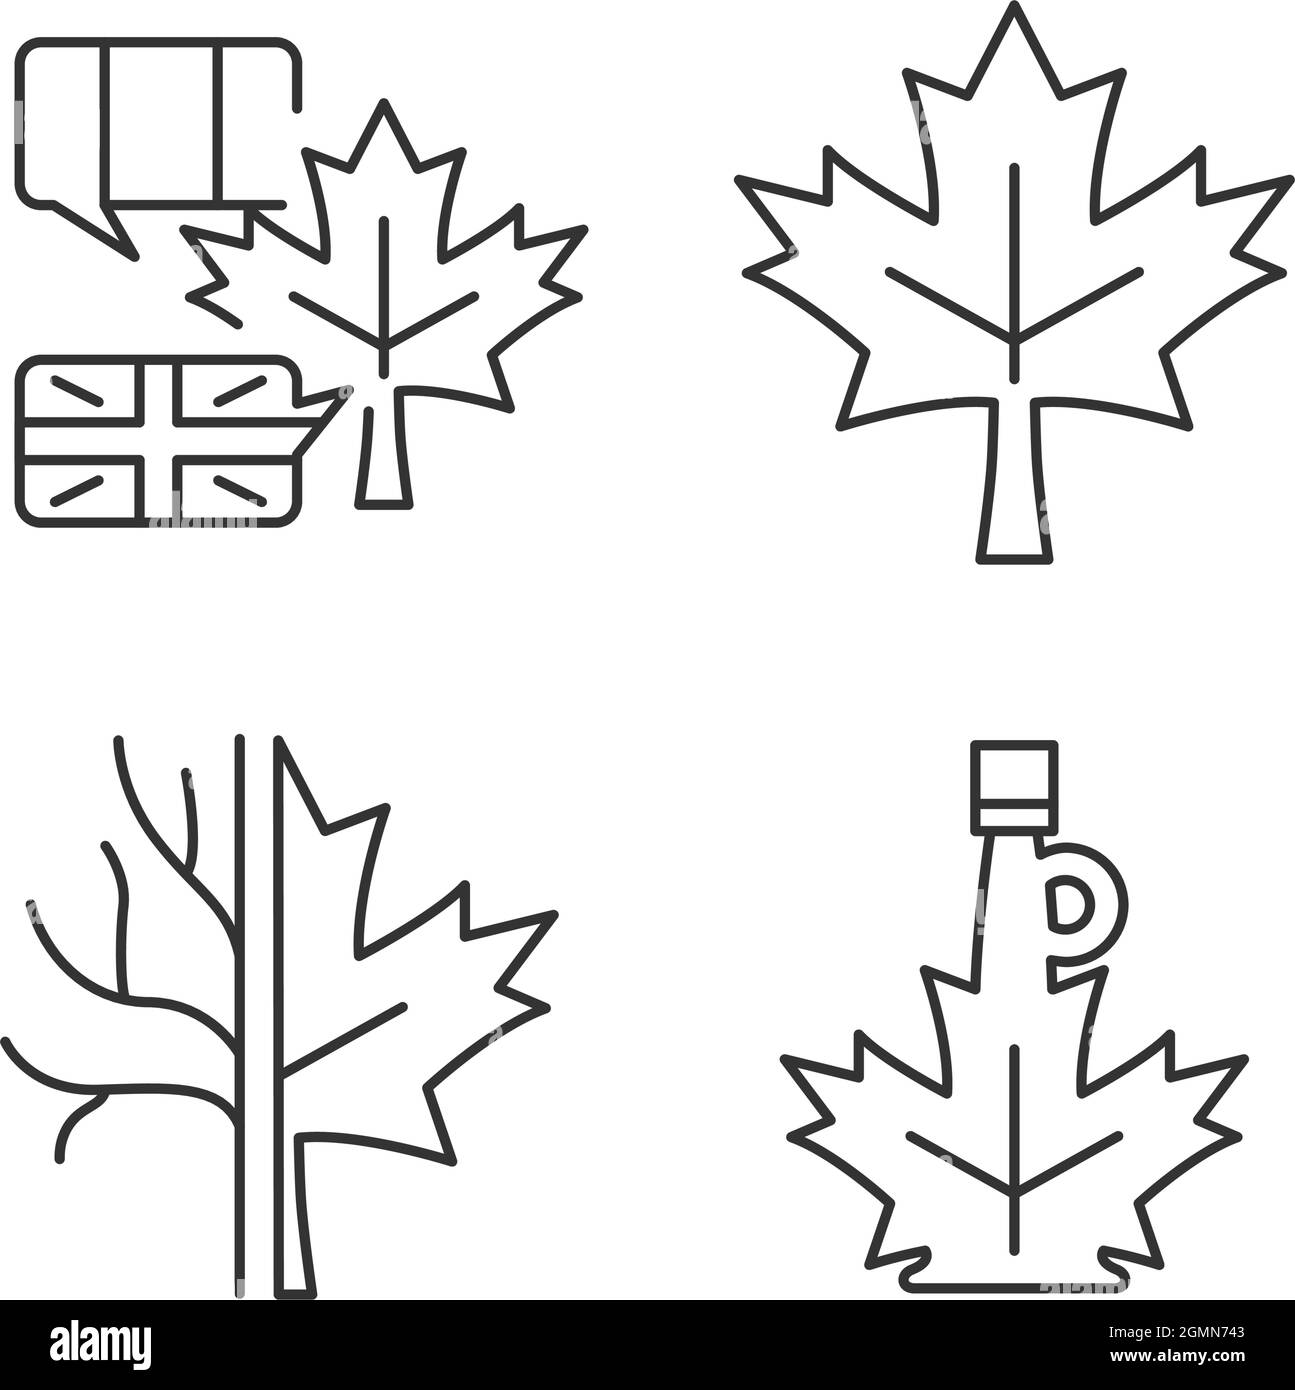 Maple leaf significance linear icons set Stock Vector